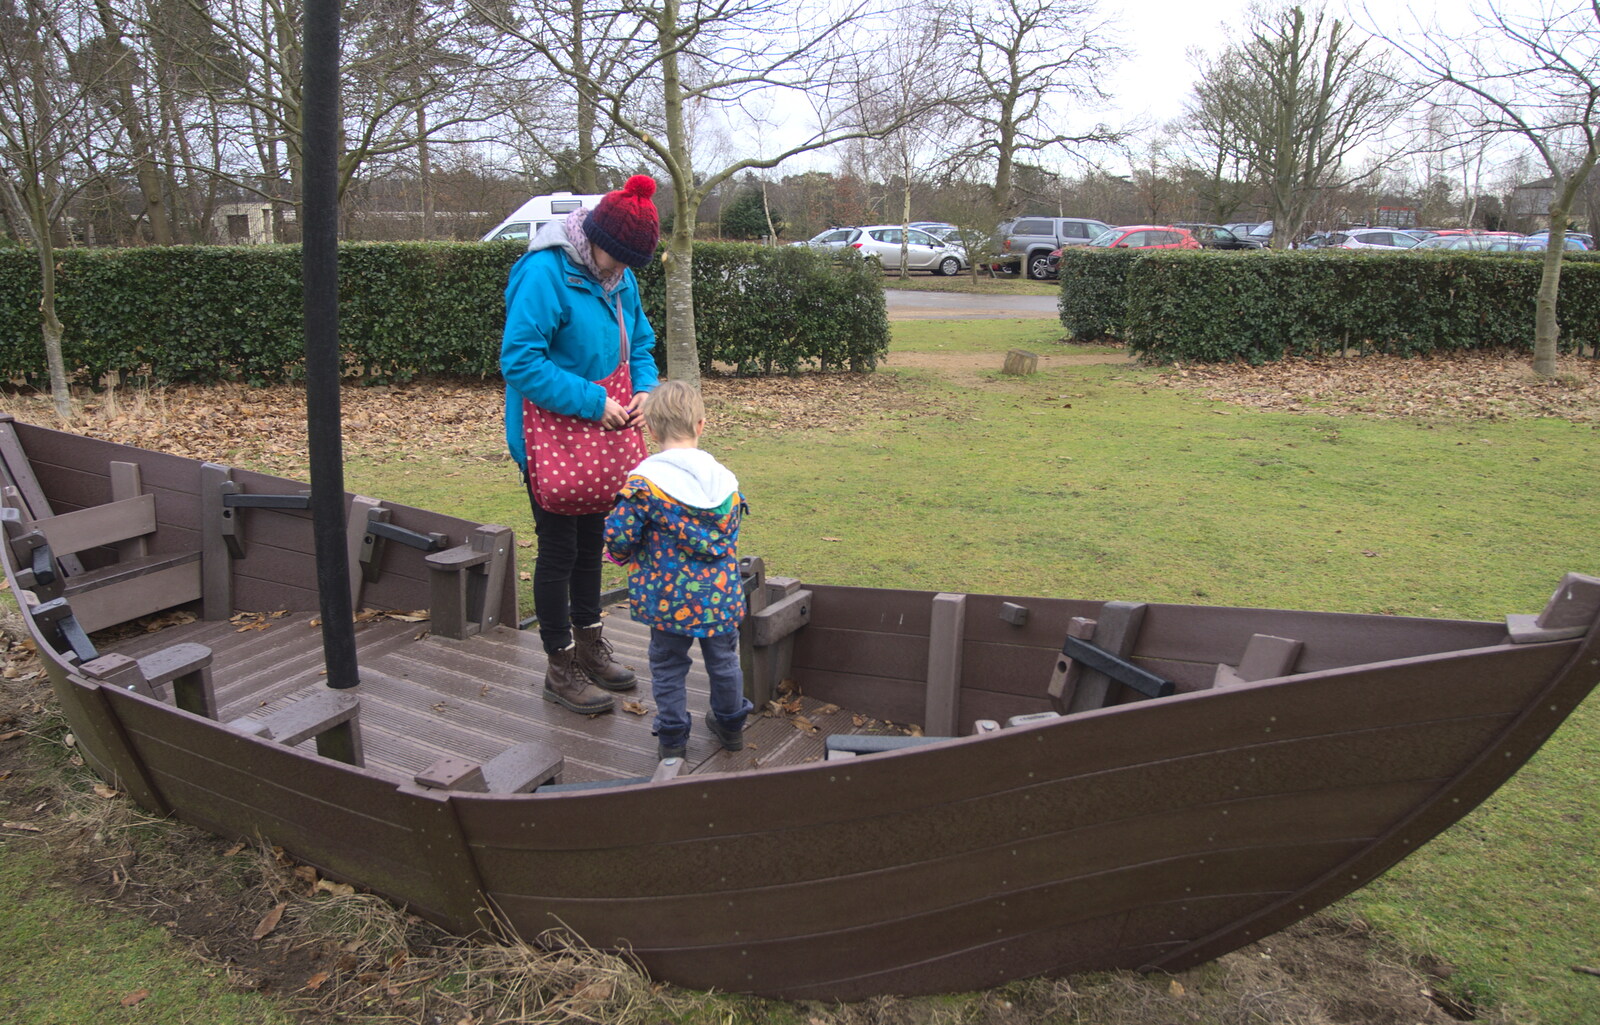 Harry's in a play boat from A Trip to Sutton Hoo, Woodbridge, Suffolk - 29th January 2017